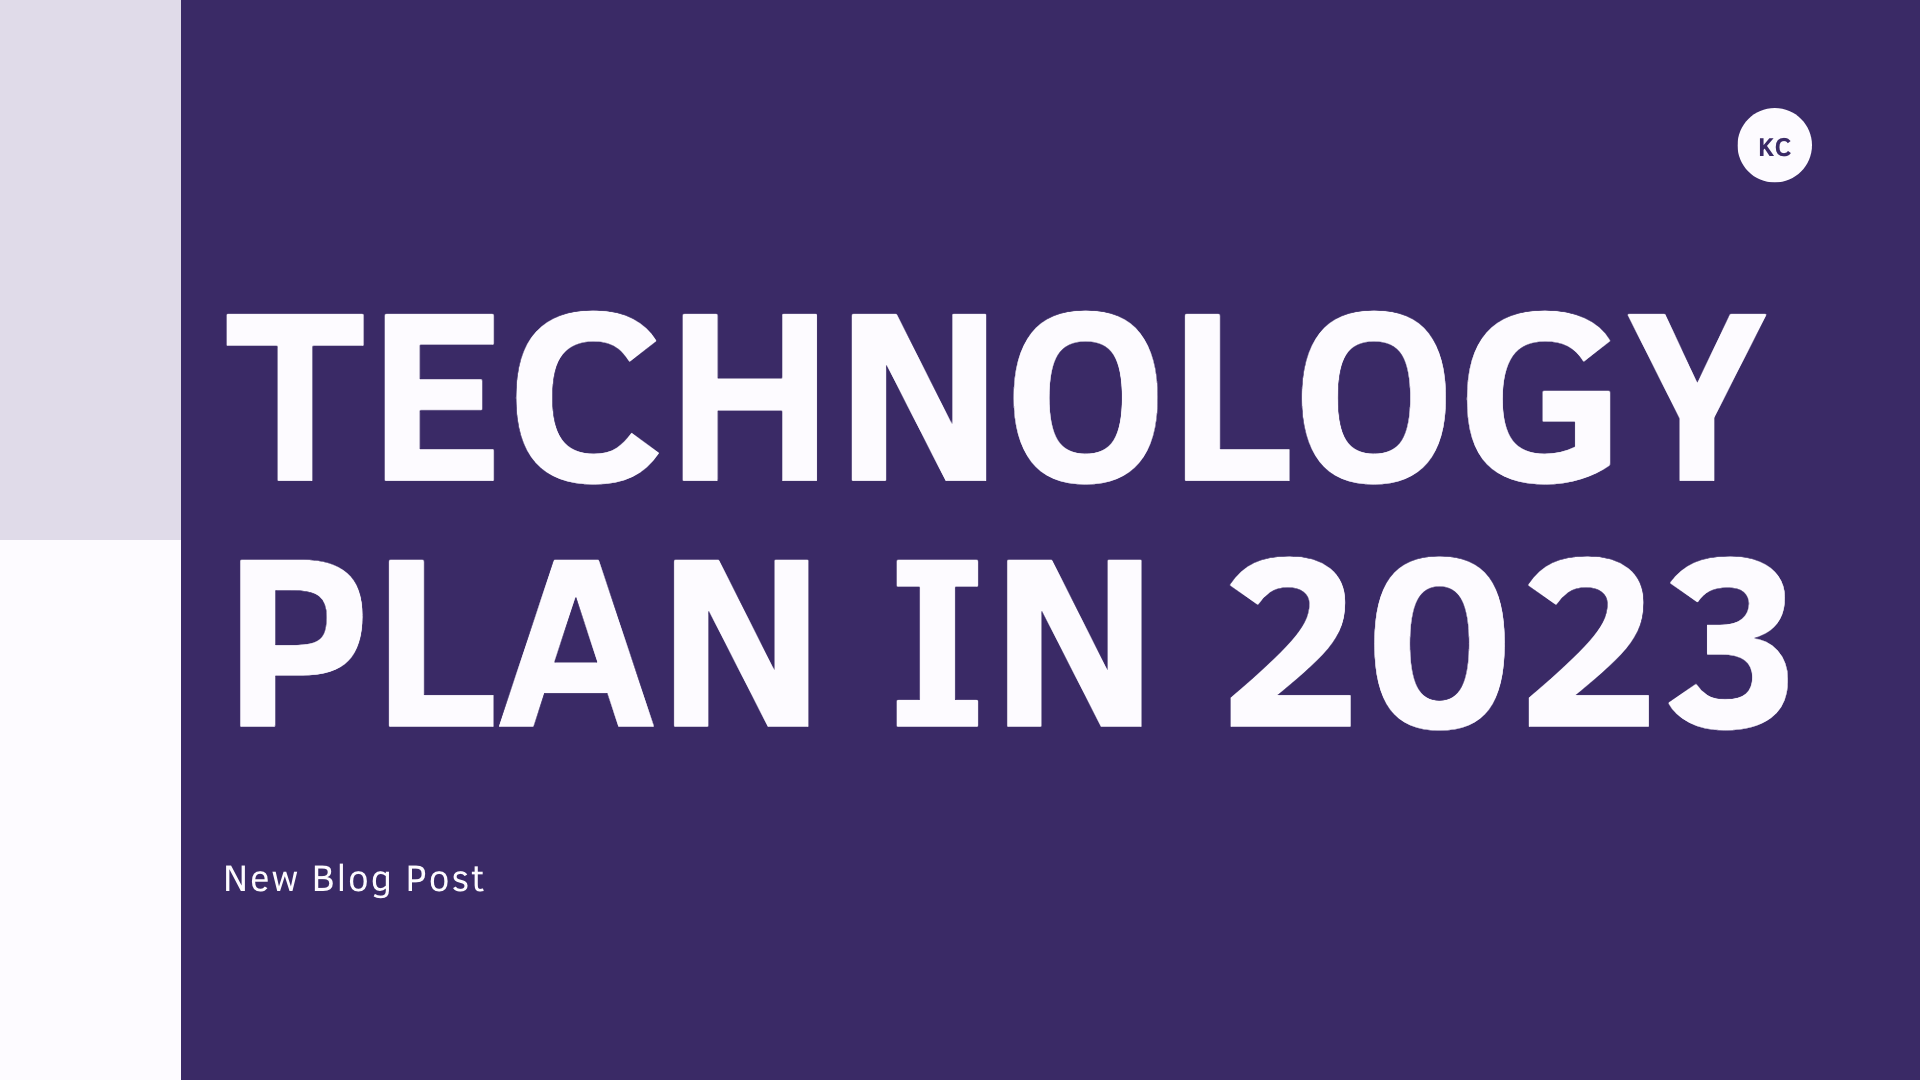 Why You Need a Workplace Technology Plan In 2023